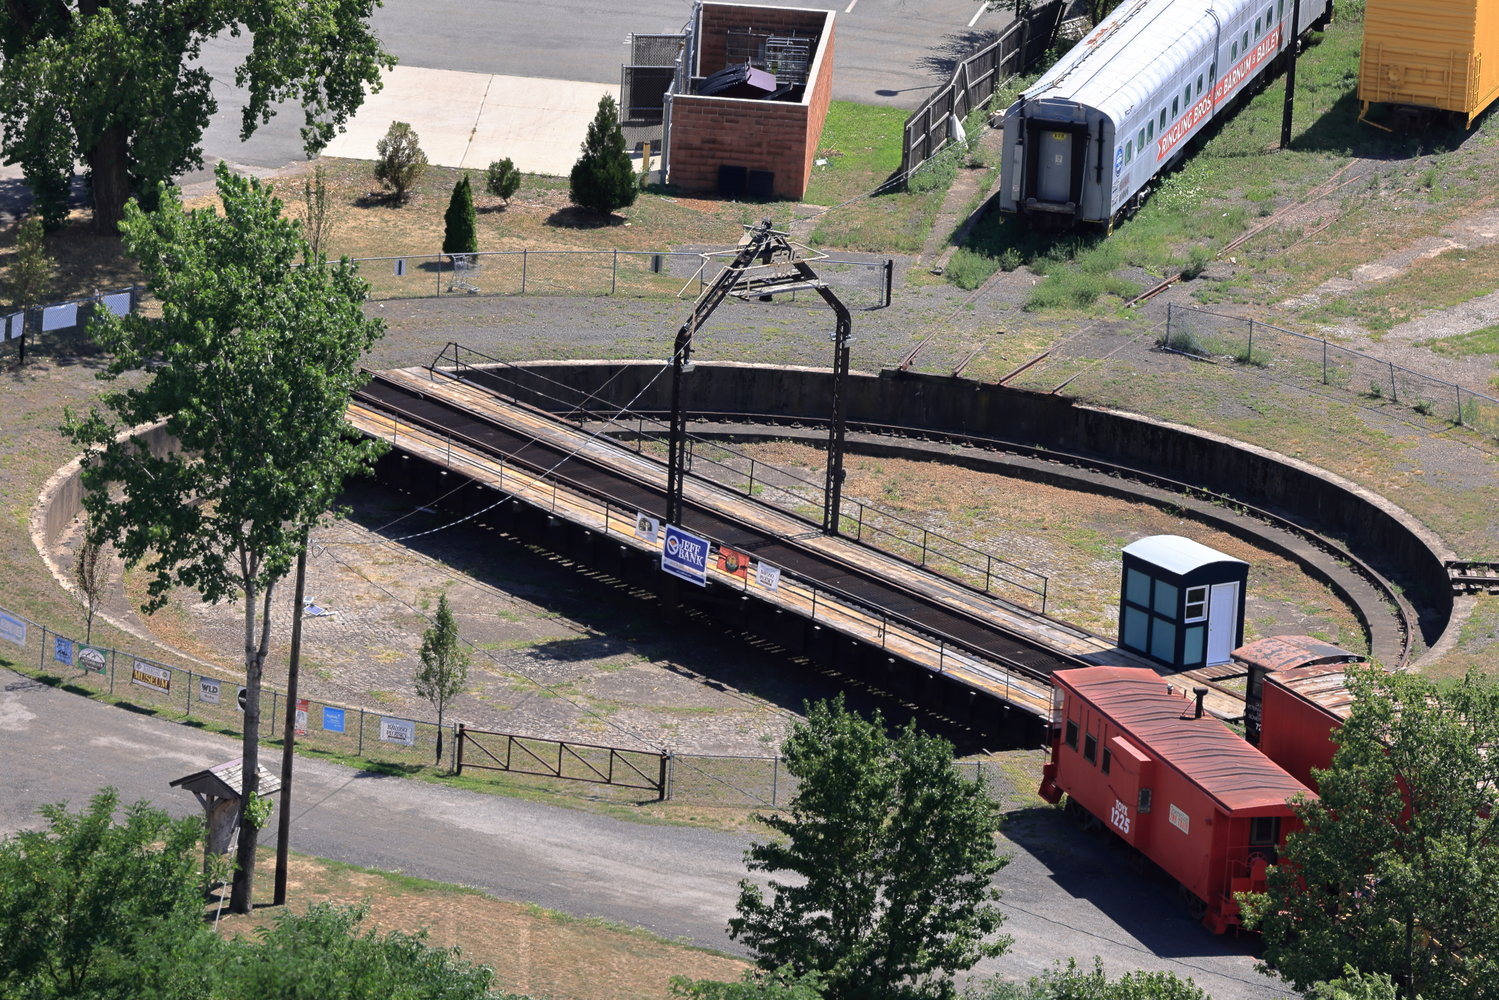 This view of the historic 115-foot railroad turntable, on the site of the Port Jervis Transportation History Center, was taken from Point Peter at Elks-Brox Park, on the hillside overlooking the city of Port Jervis.